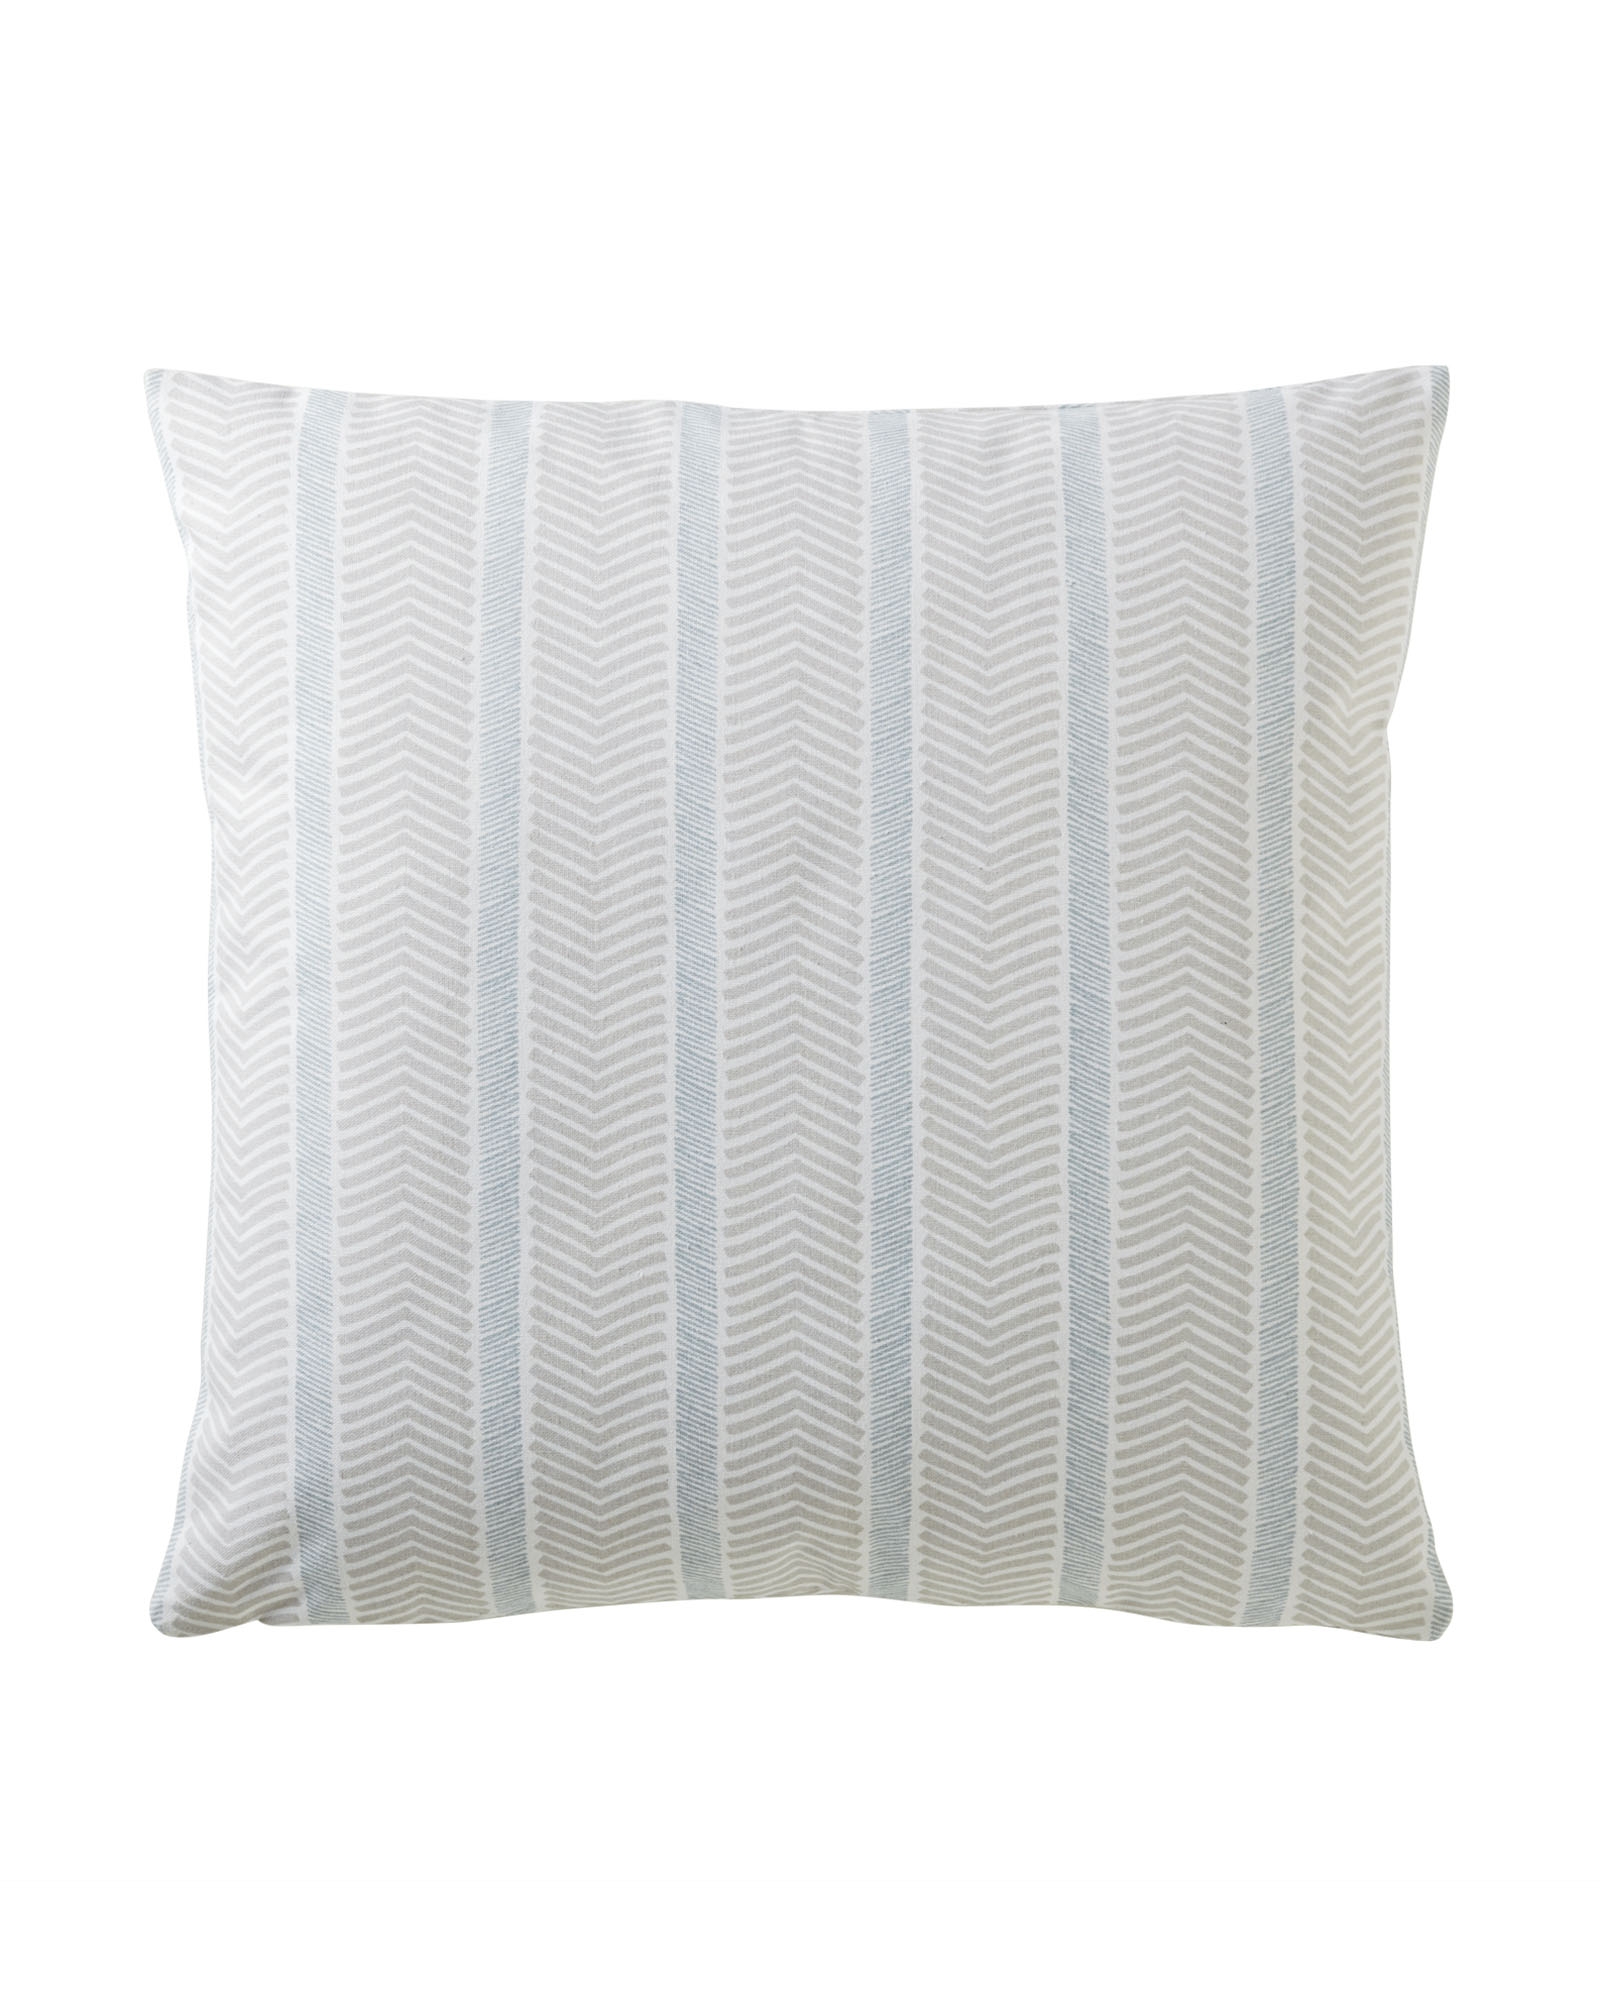 Herringbone Pillow Covers -Insert not included - Image 0